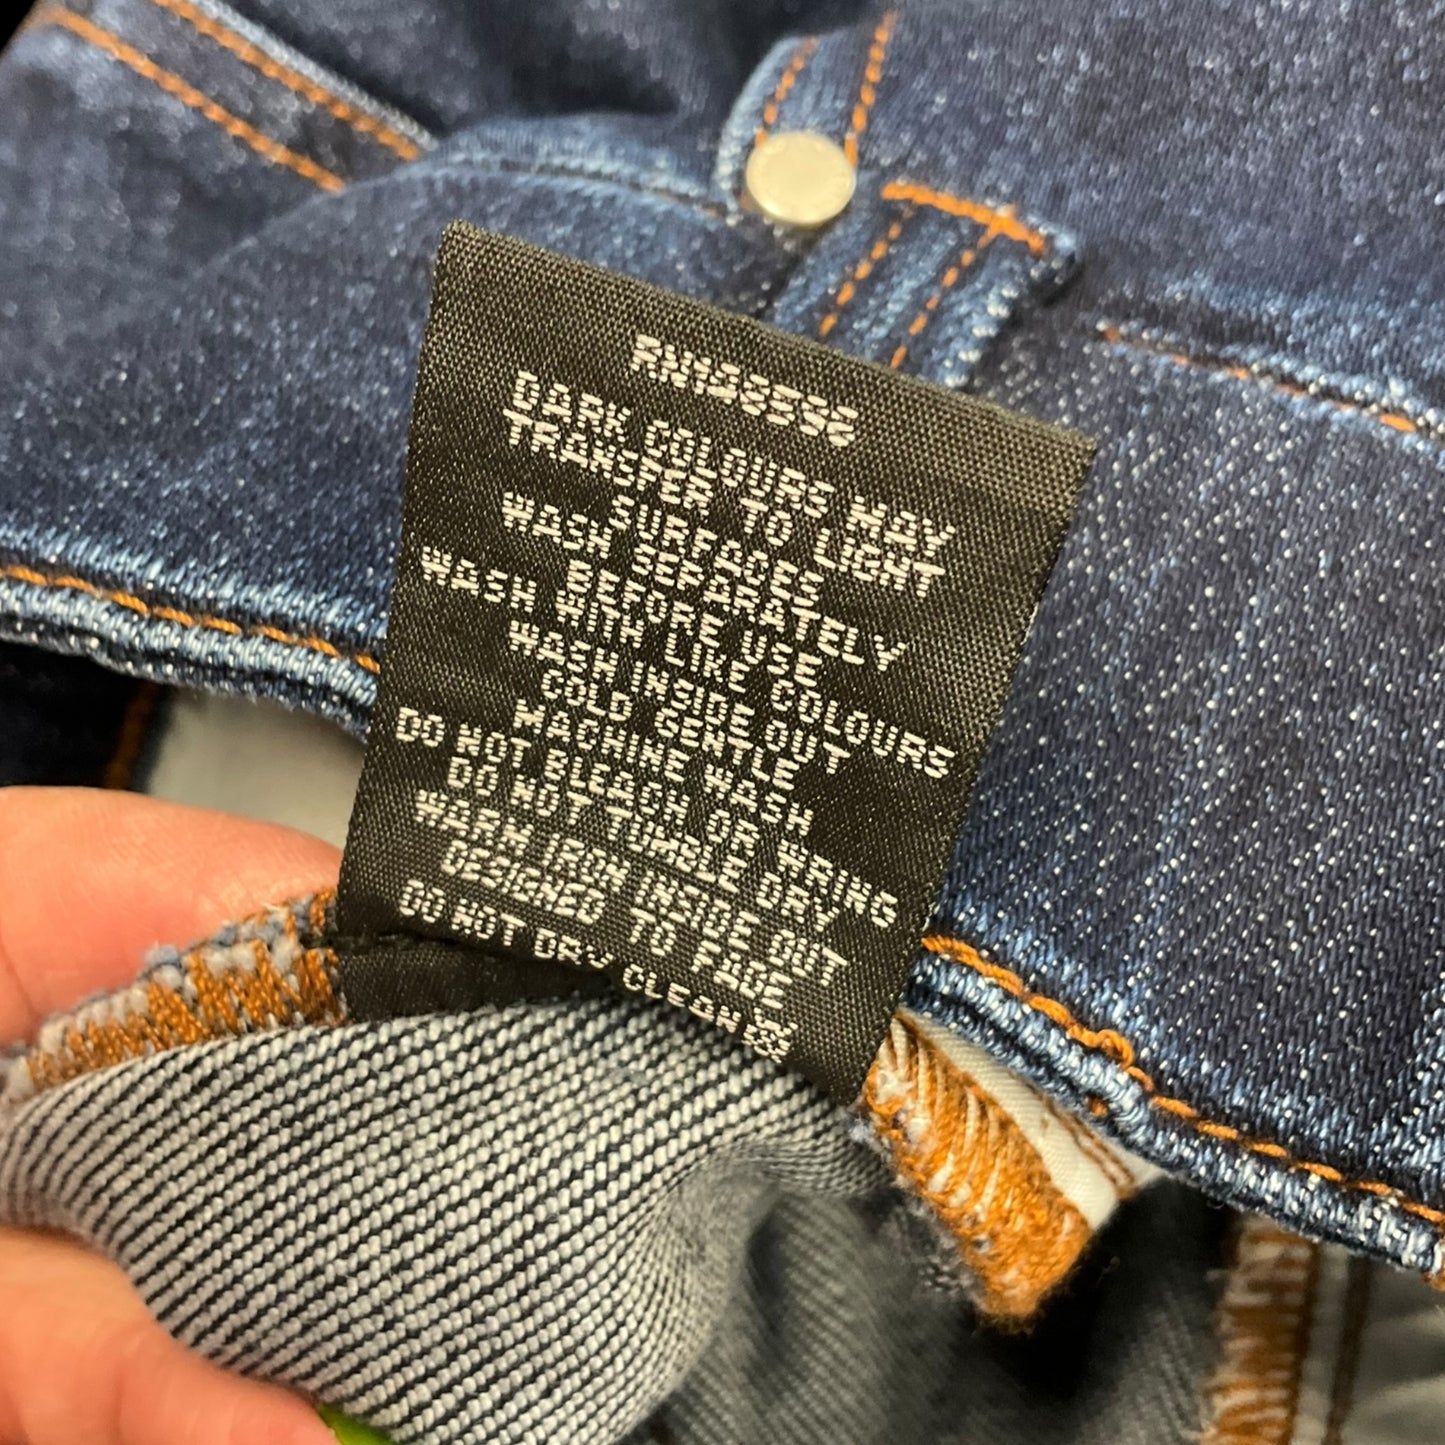 Jeans Straight By Clothes Mentor  Size: 16